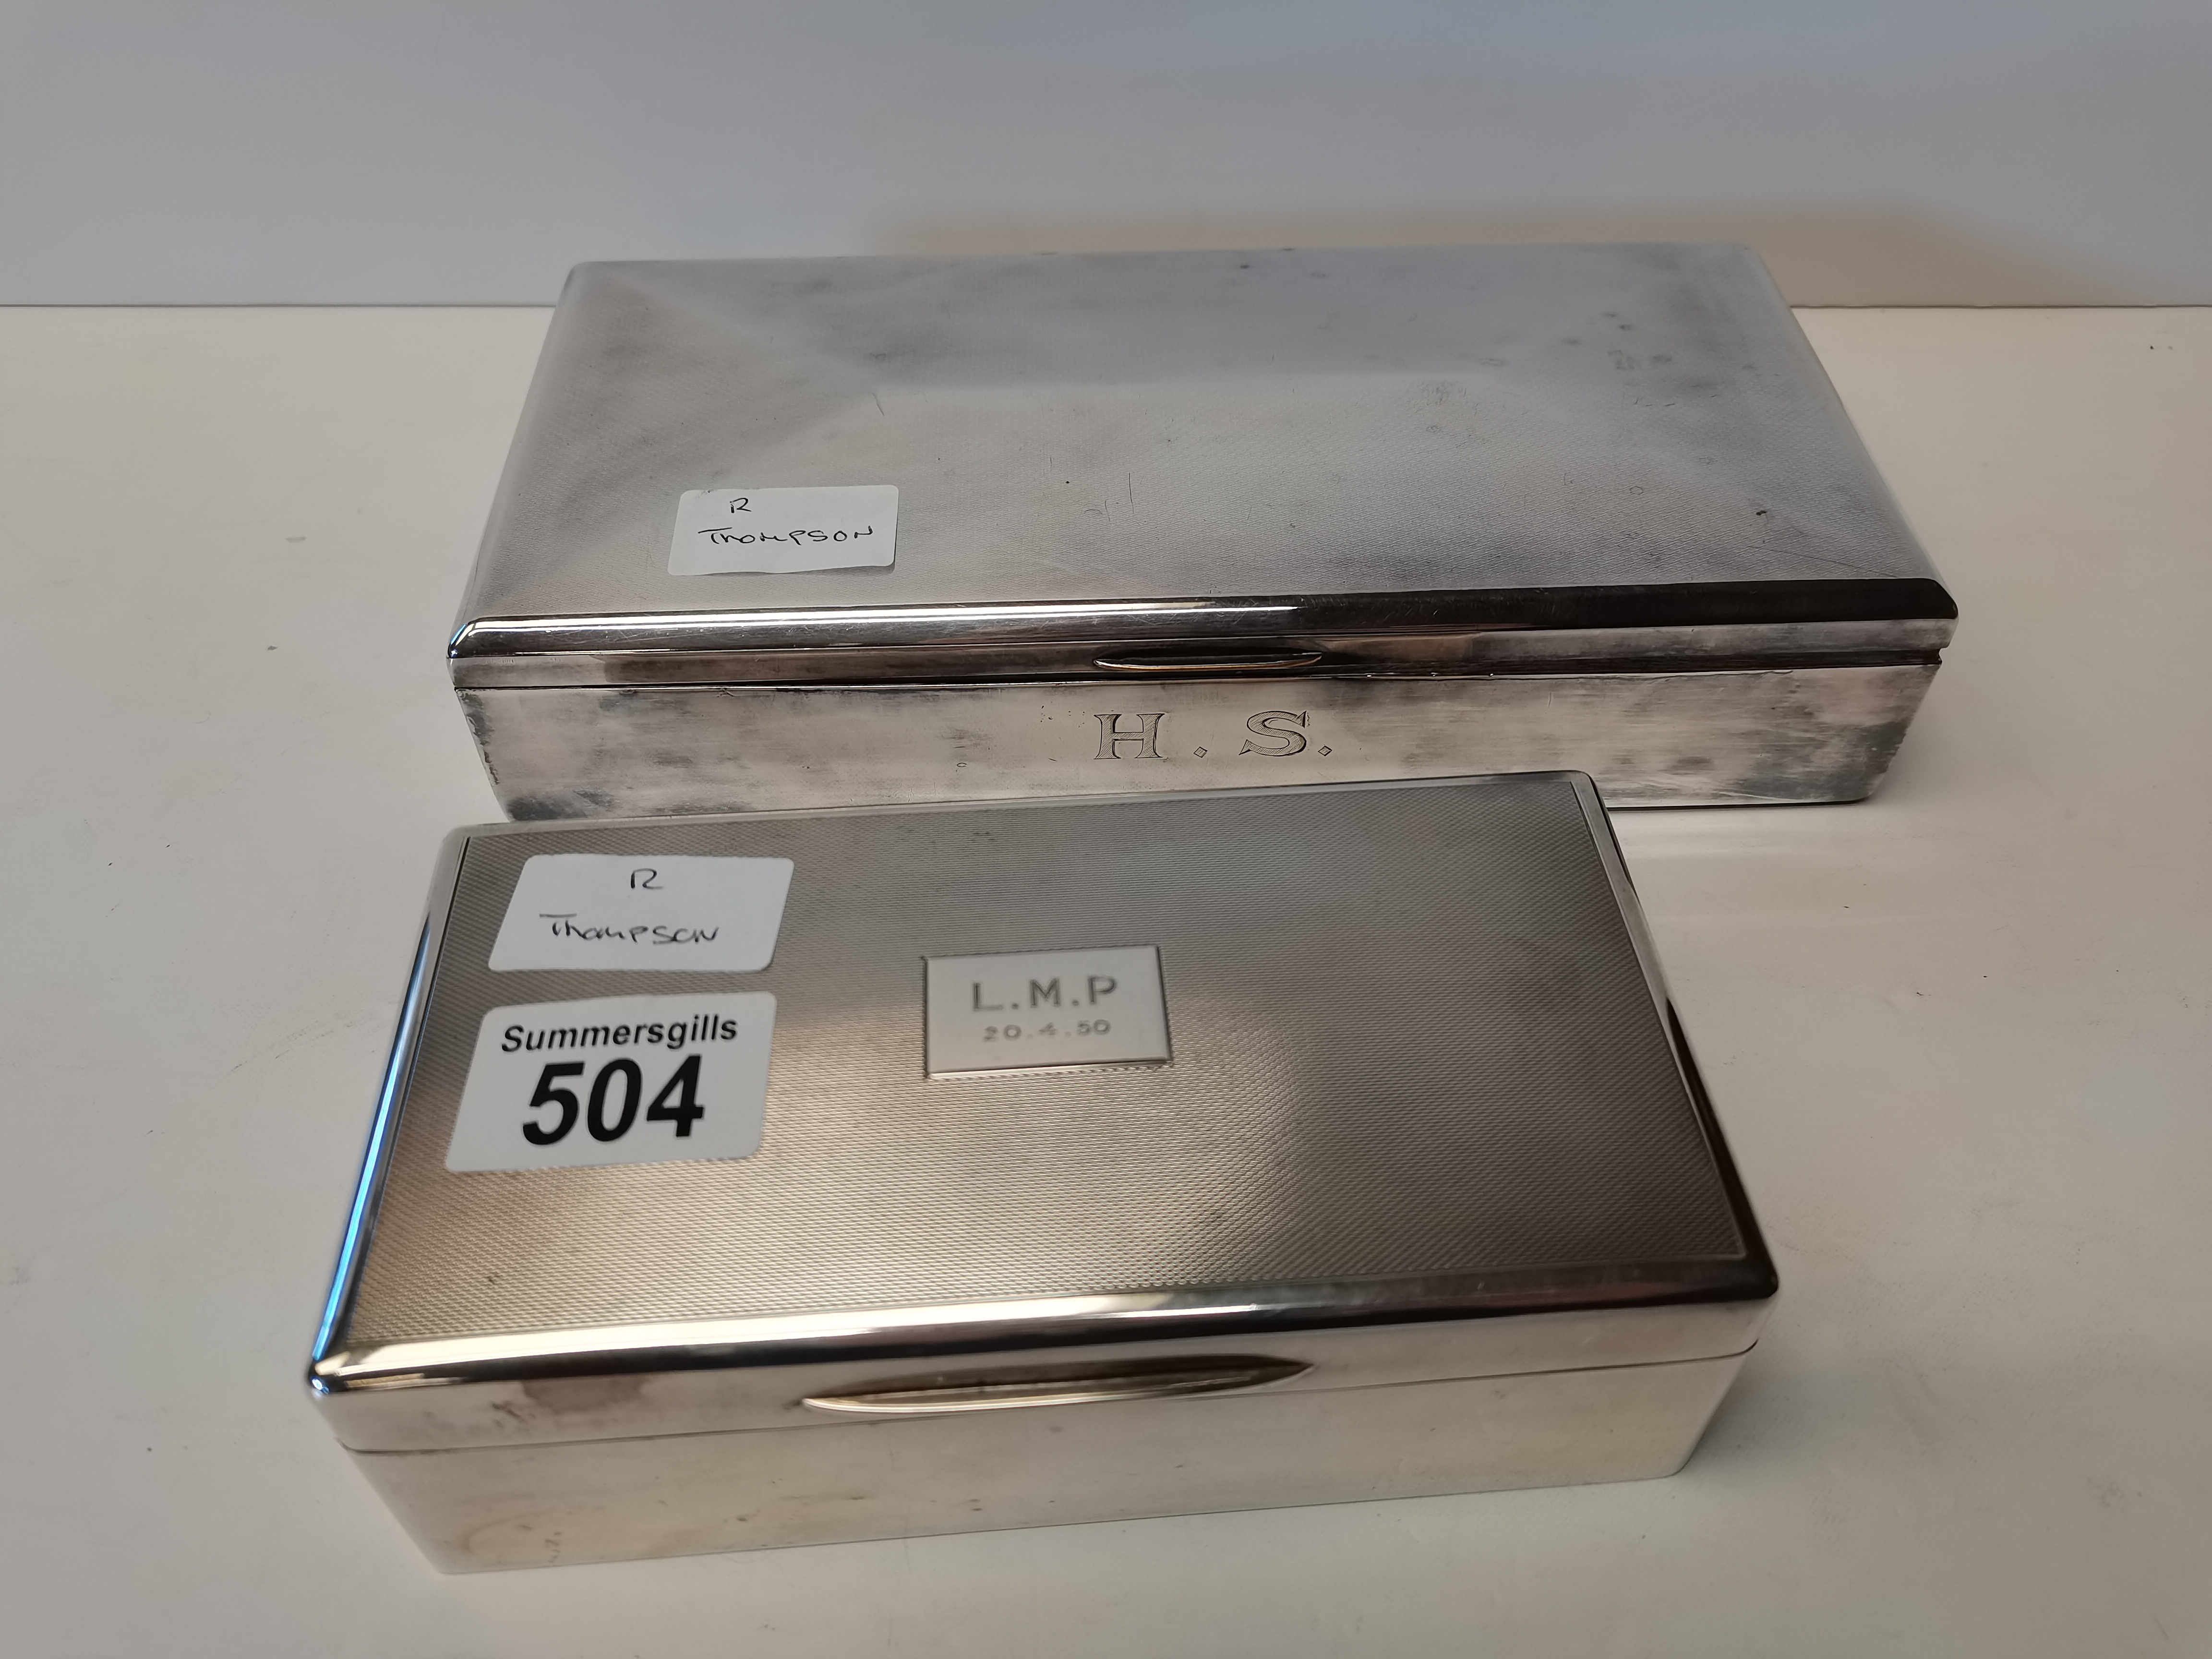 London silver cigarette box and silver plated cig. Box marked HS and State express cigaretttes